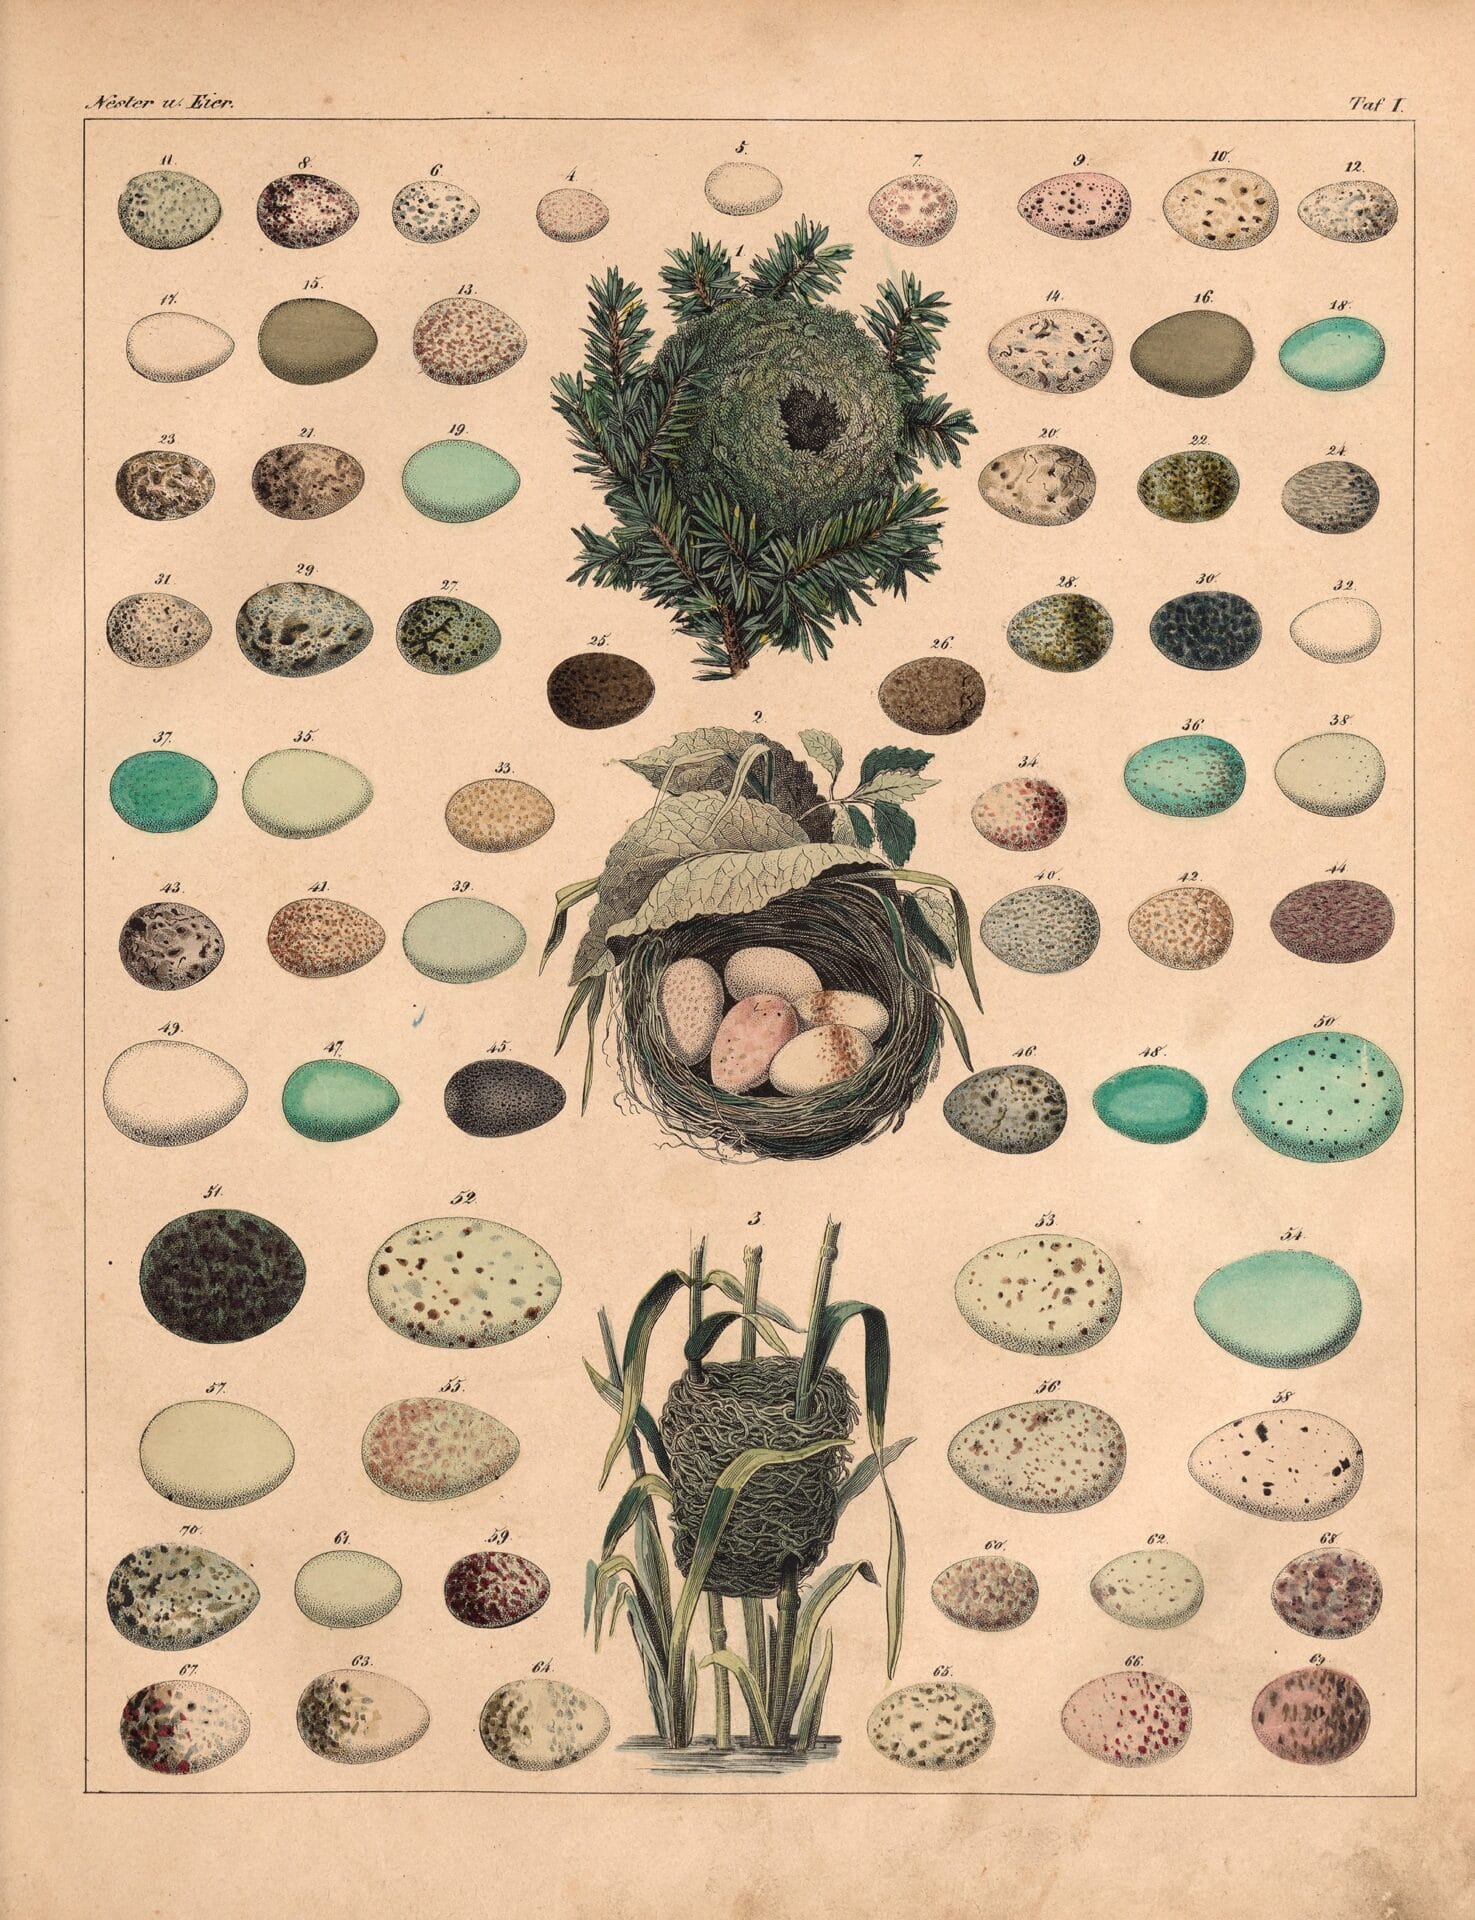 an 18th-century natural history book illustration of bird eggs and nests